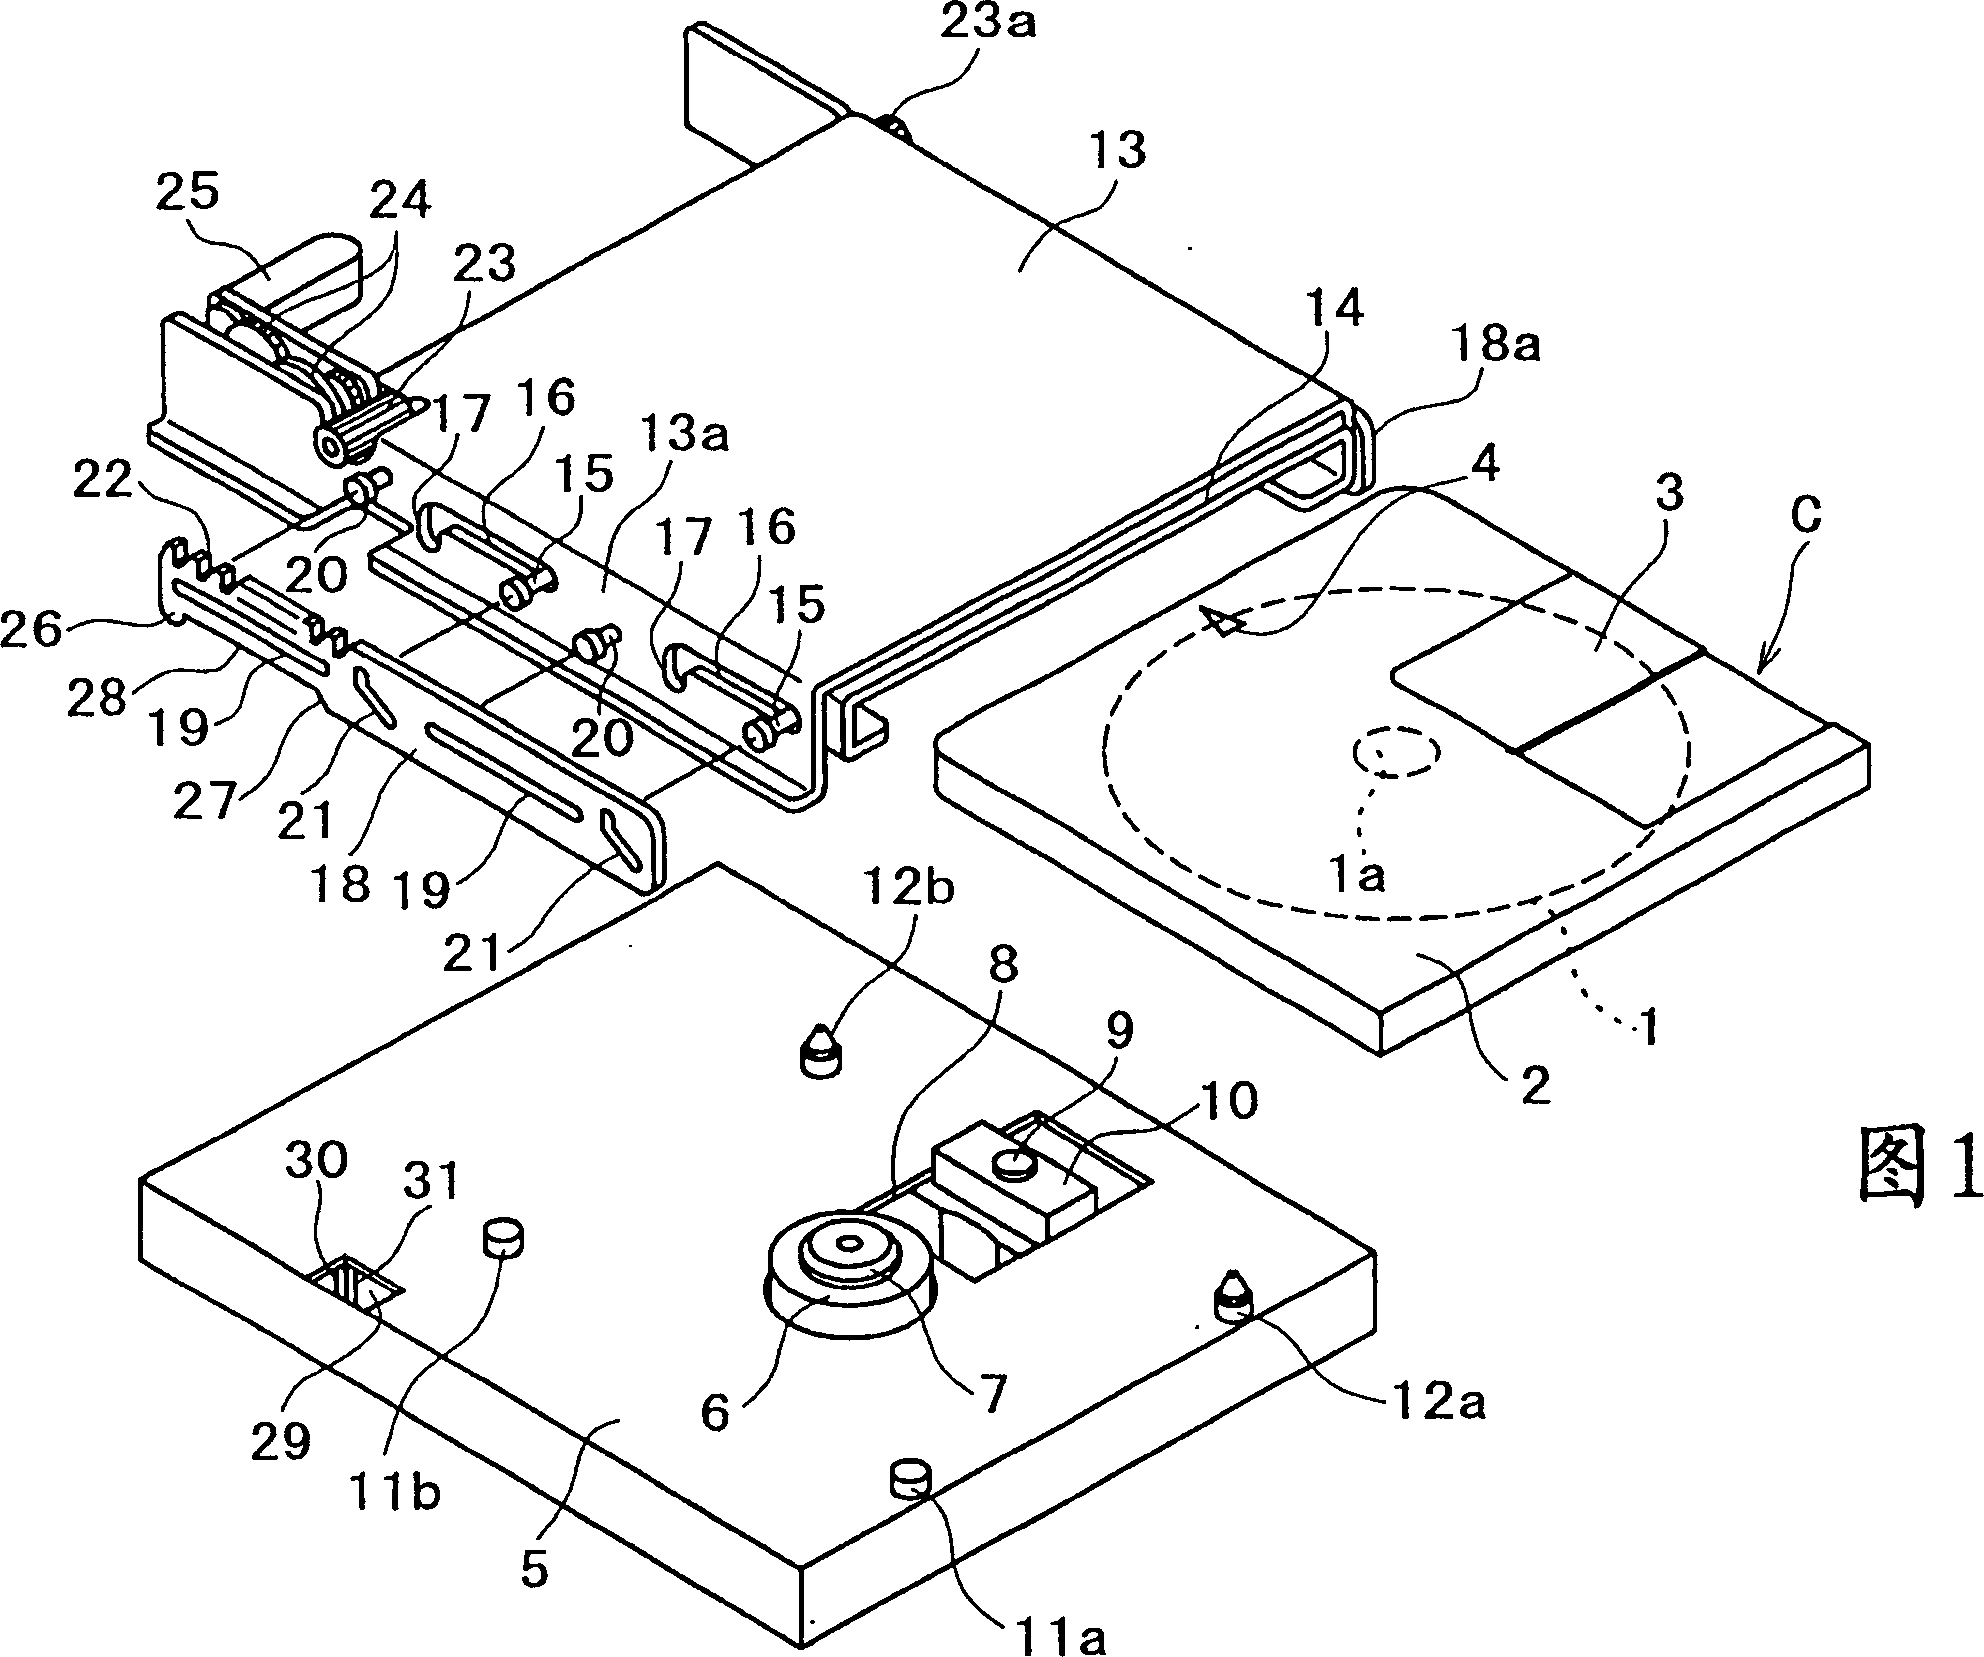 Disc recording-playing device